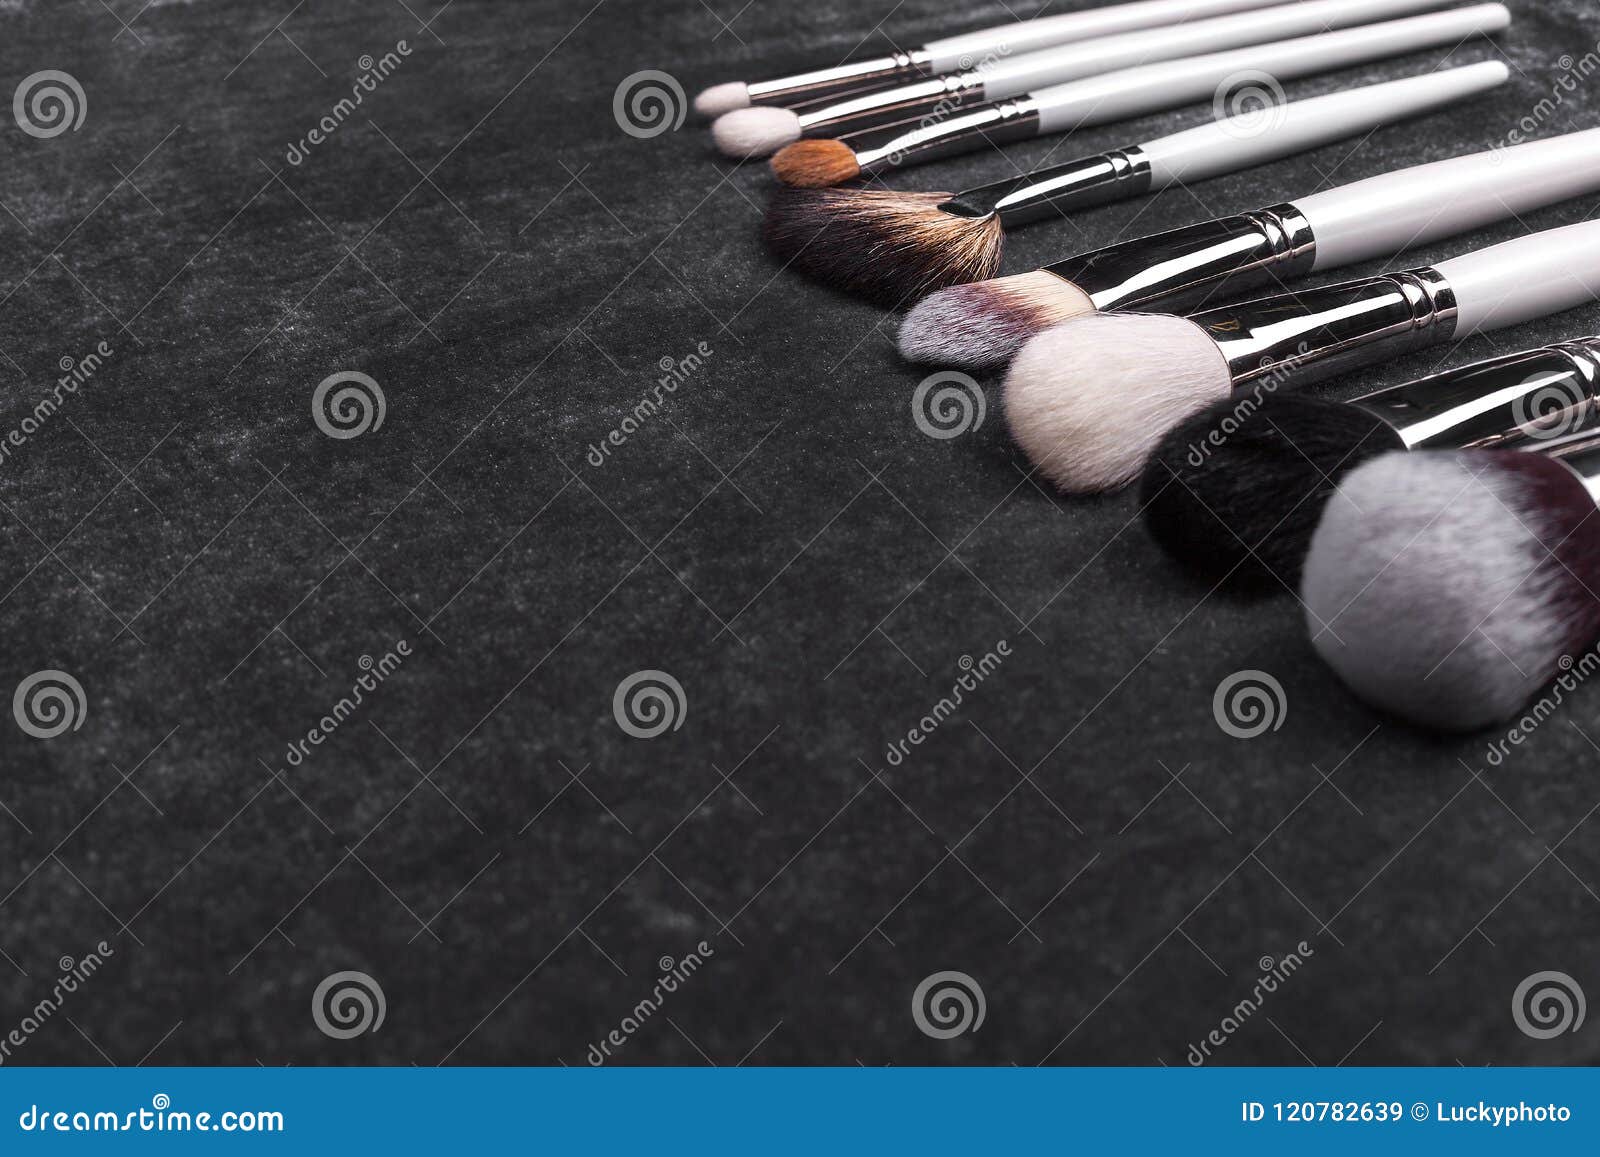 Variety Of Different Makeup Brushes Stock Image Image Of Female